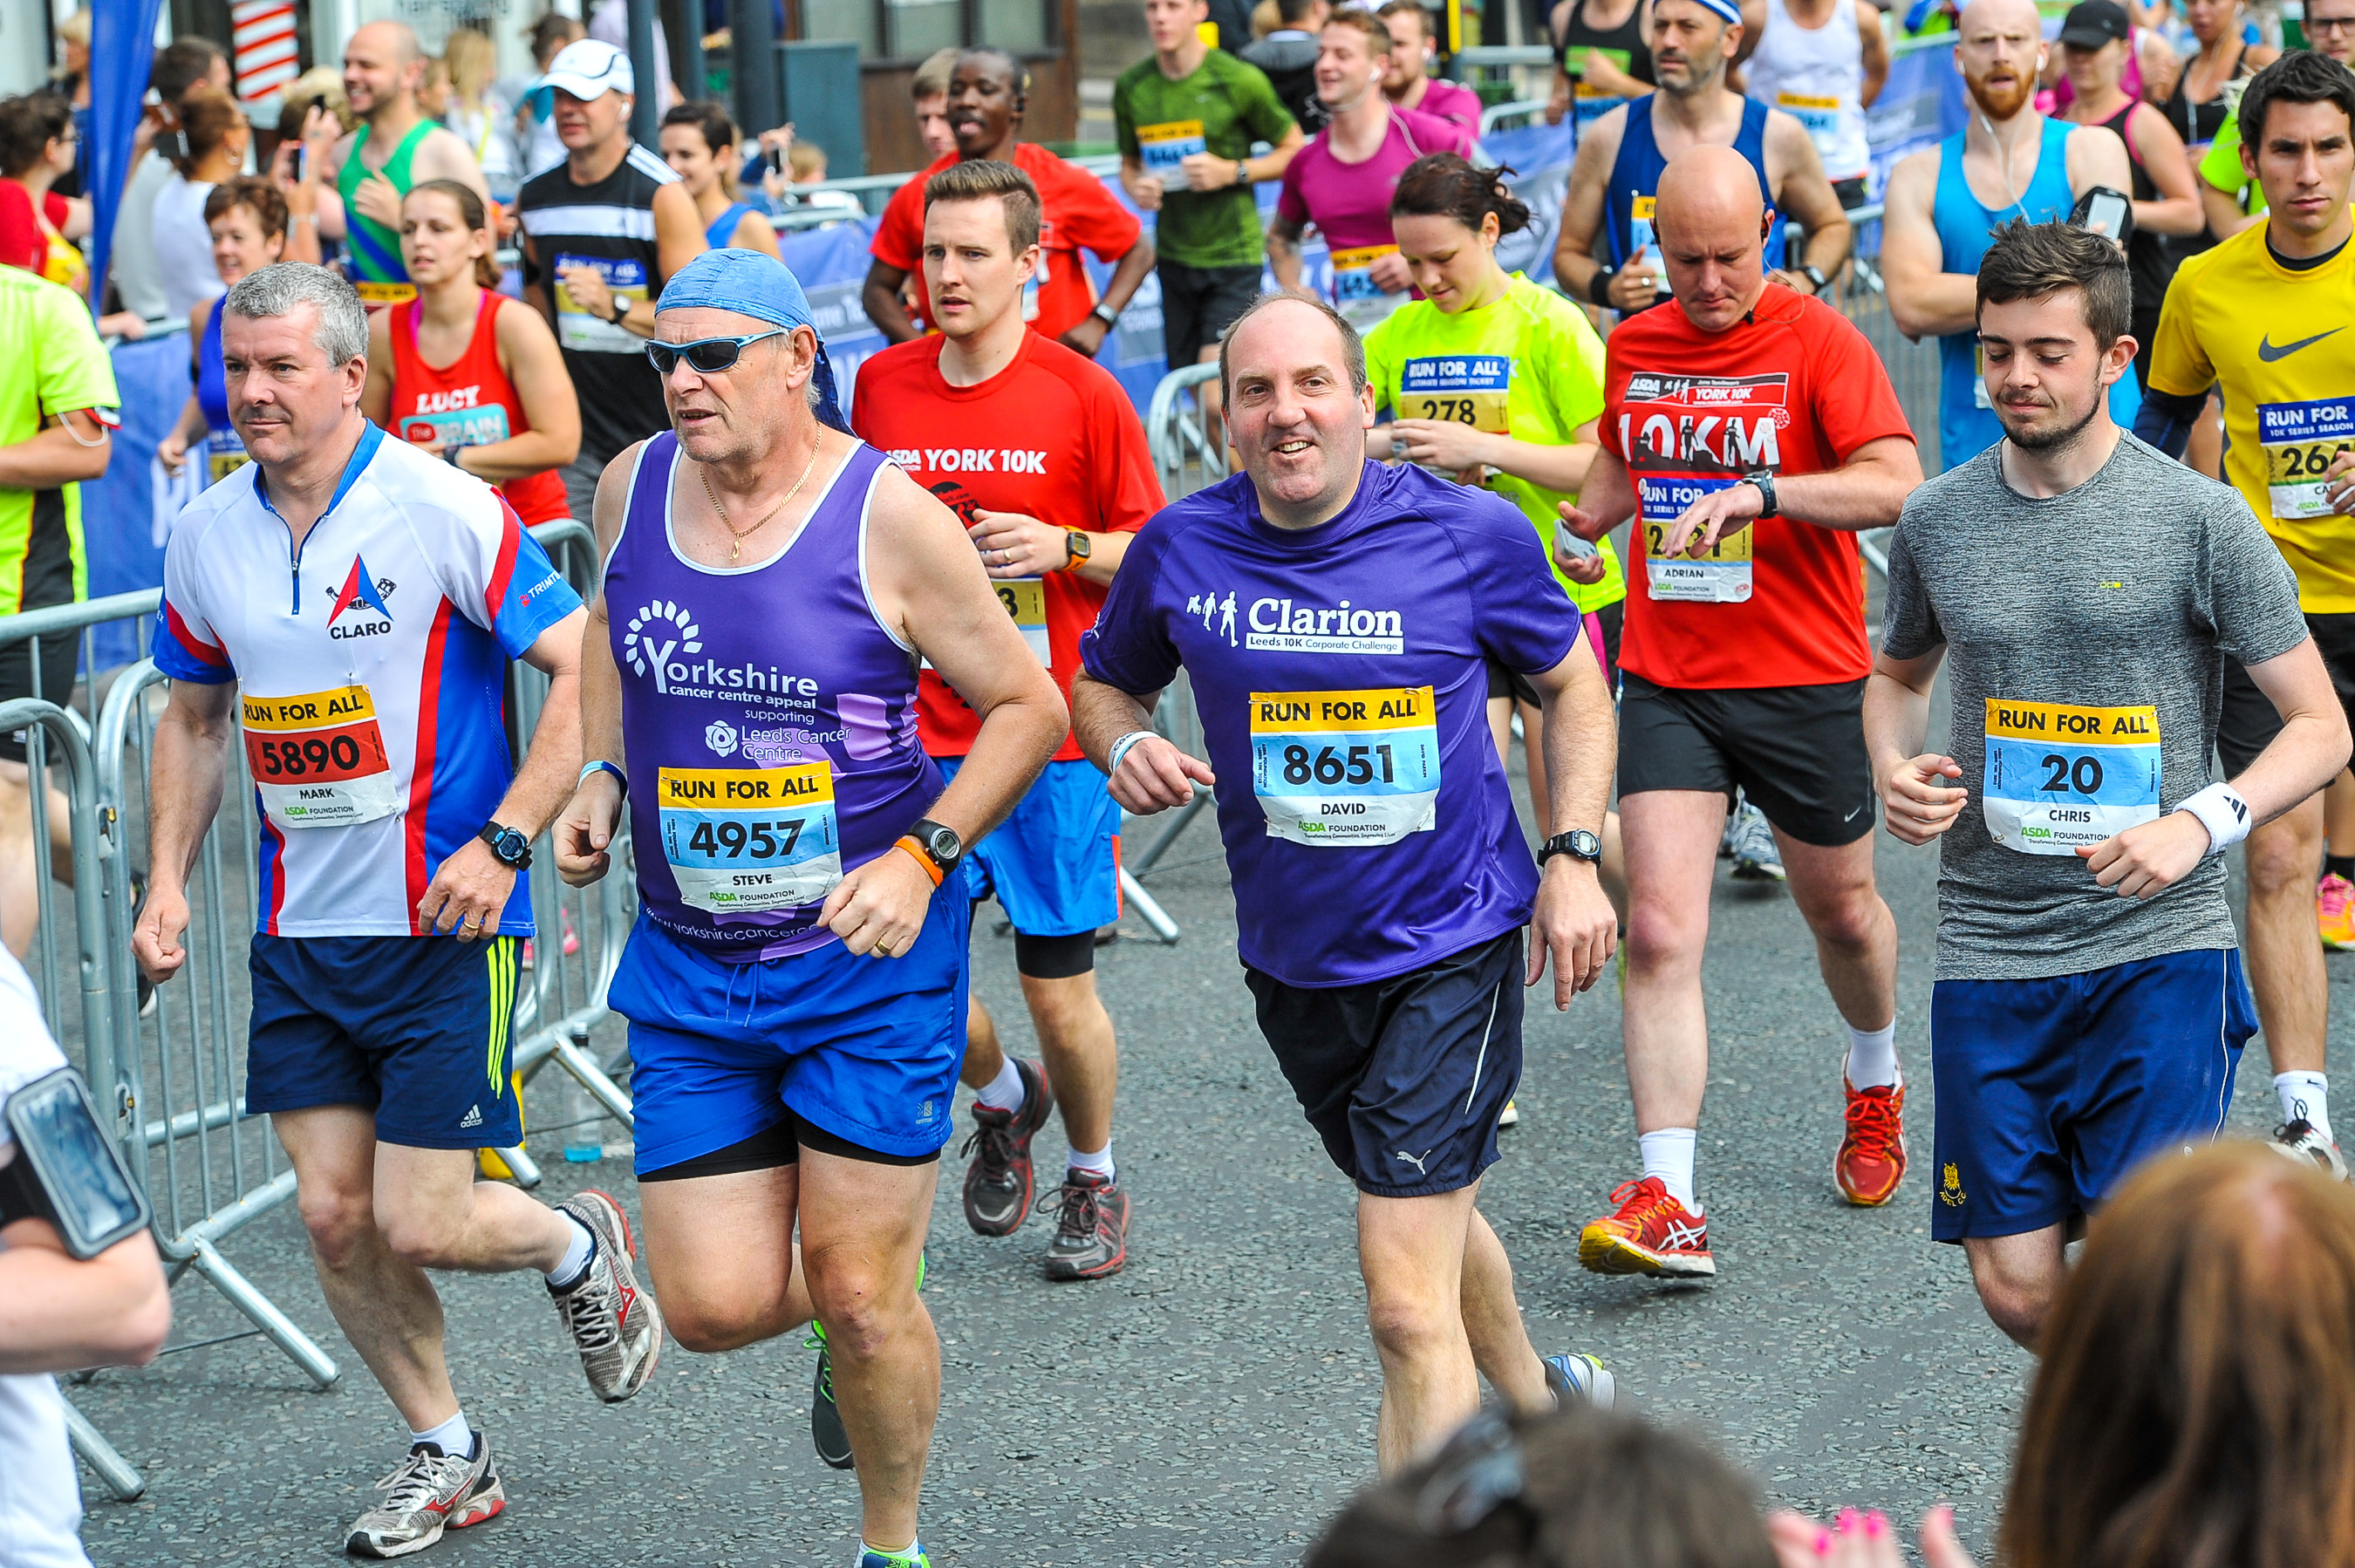 David Parkin on a big wheel for the Northern Powerhouse, the Leeds 10k and bald facts